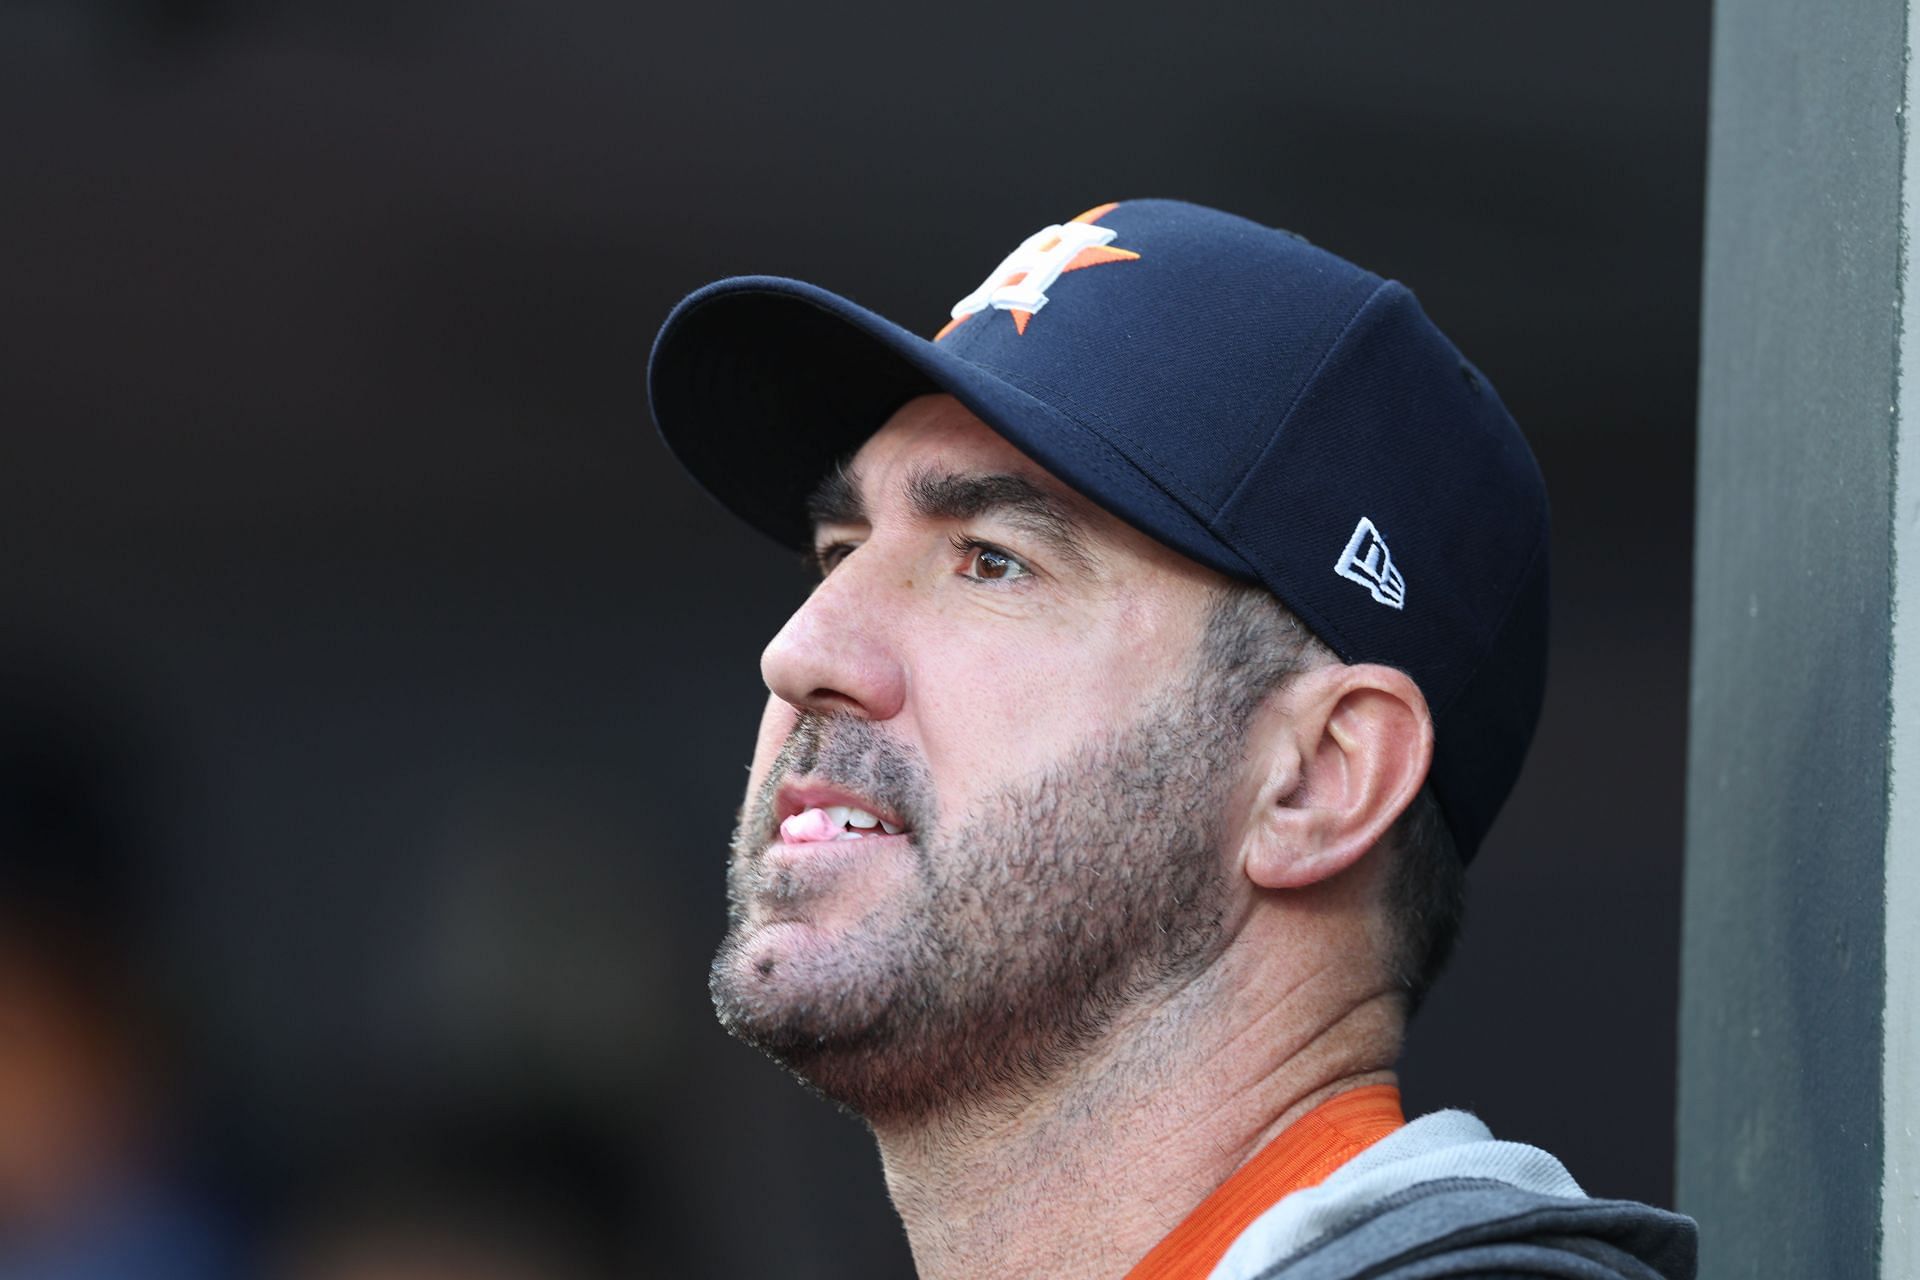 Justin Verlander's 2023 player option contingent on 2022 innings threshold  with Astros